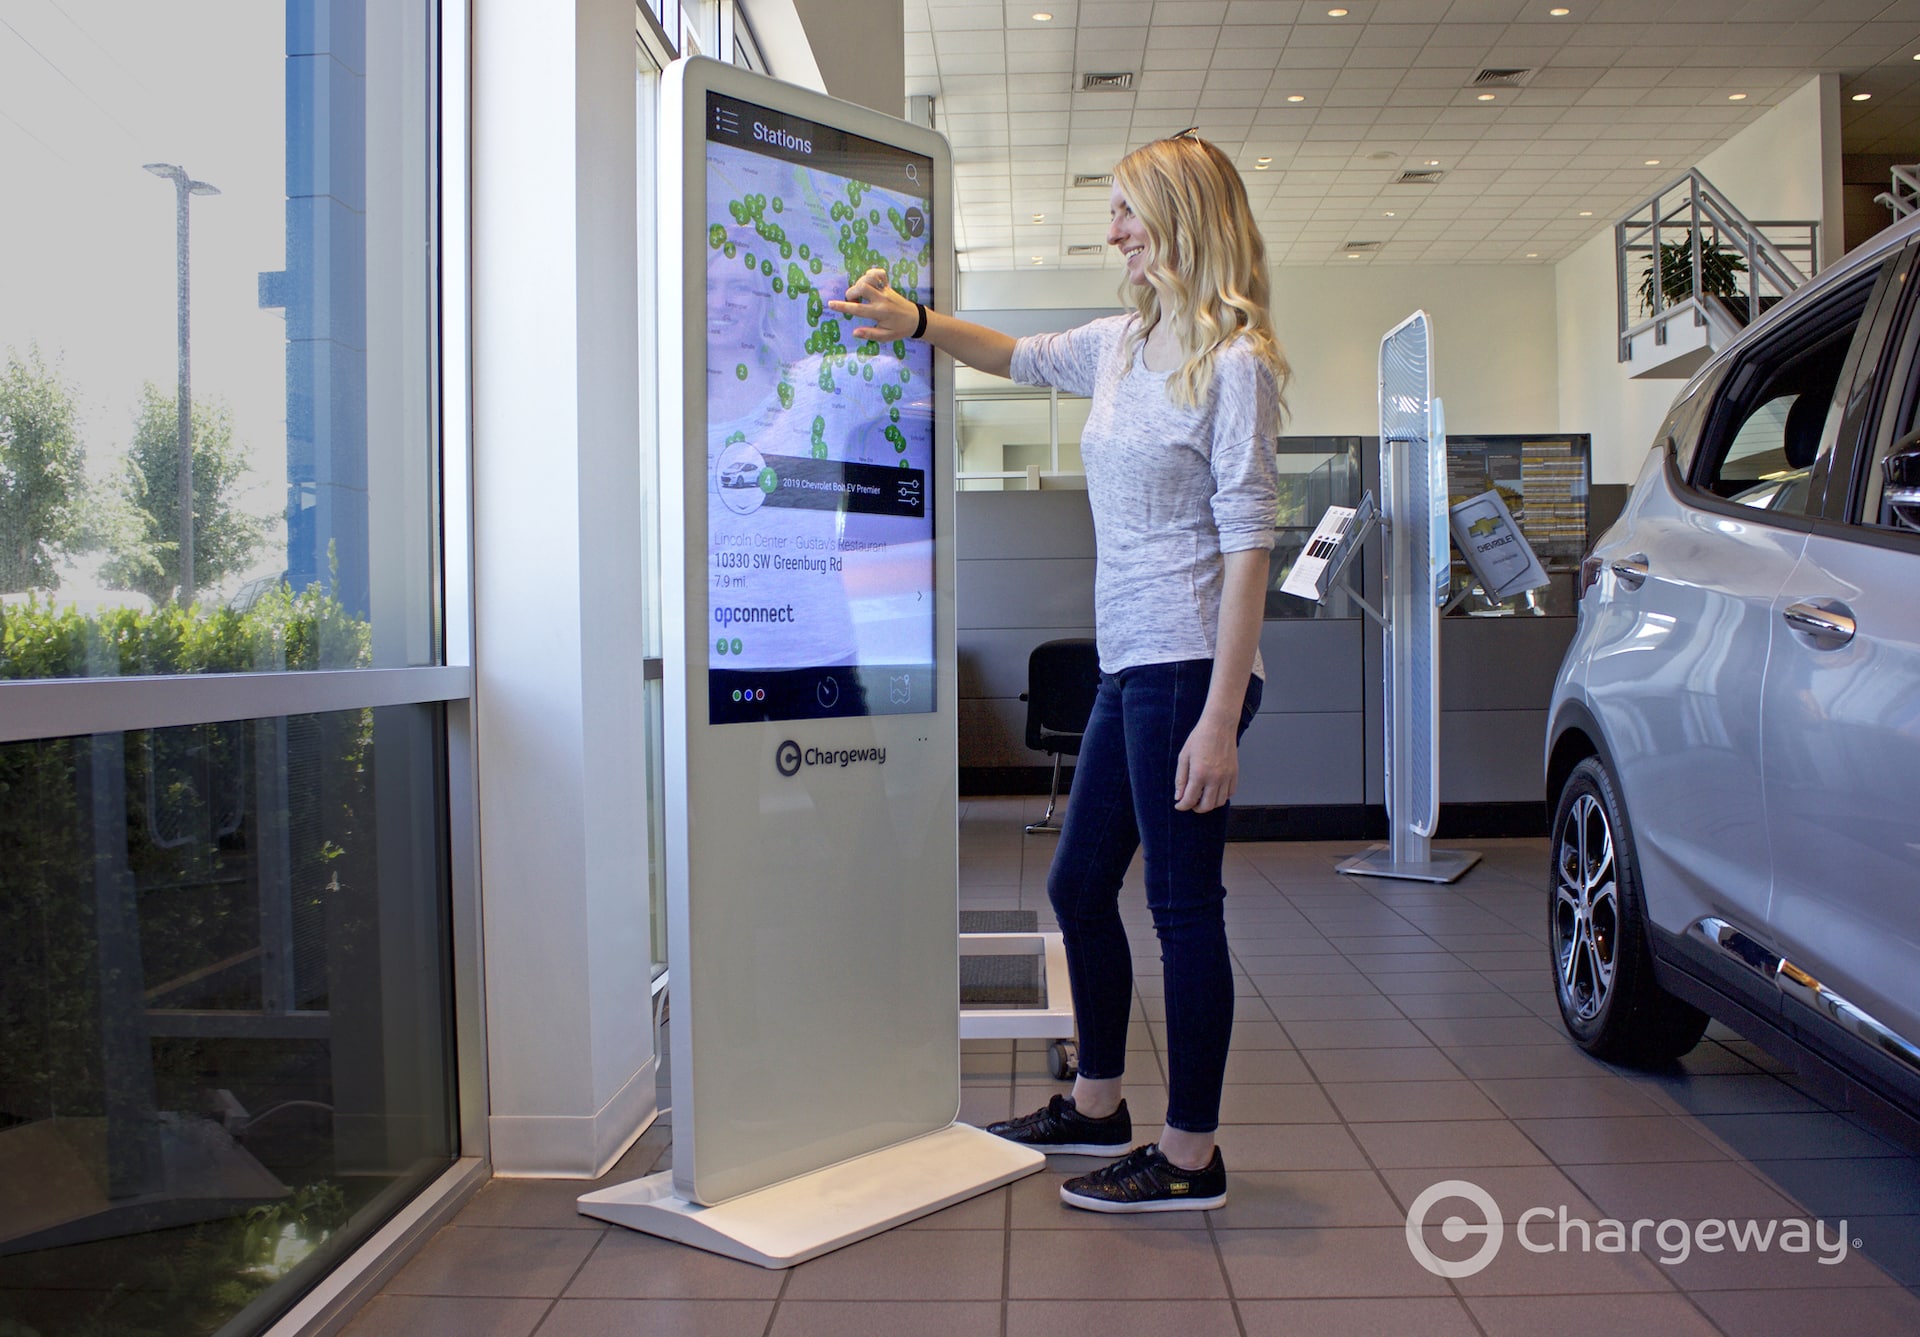 Chargeway Teams Up with NYPA to Simplify EV Charging for New Yorkers